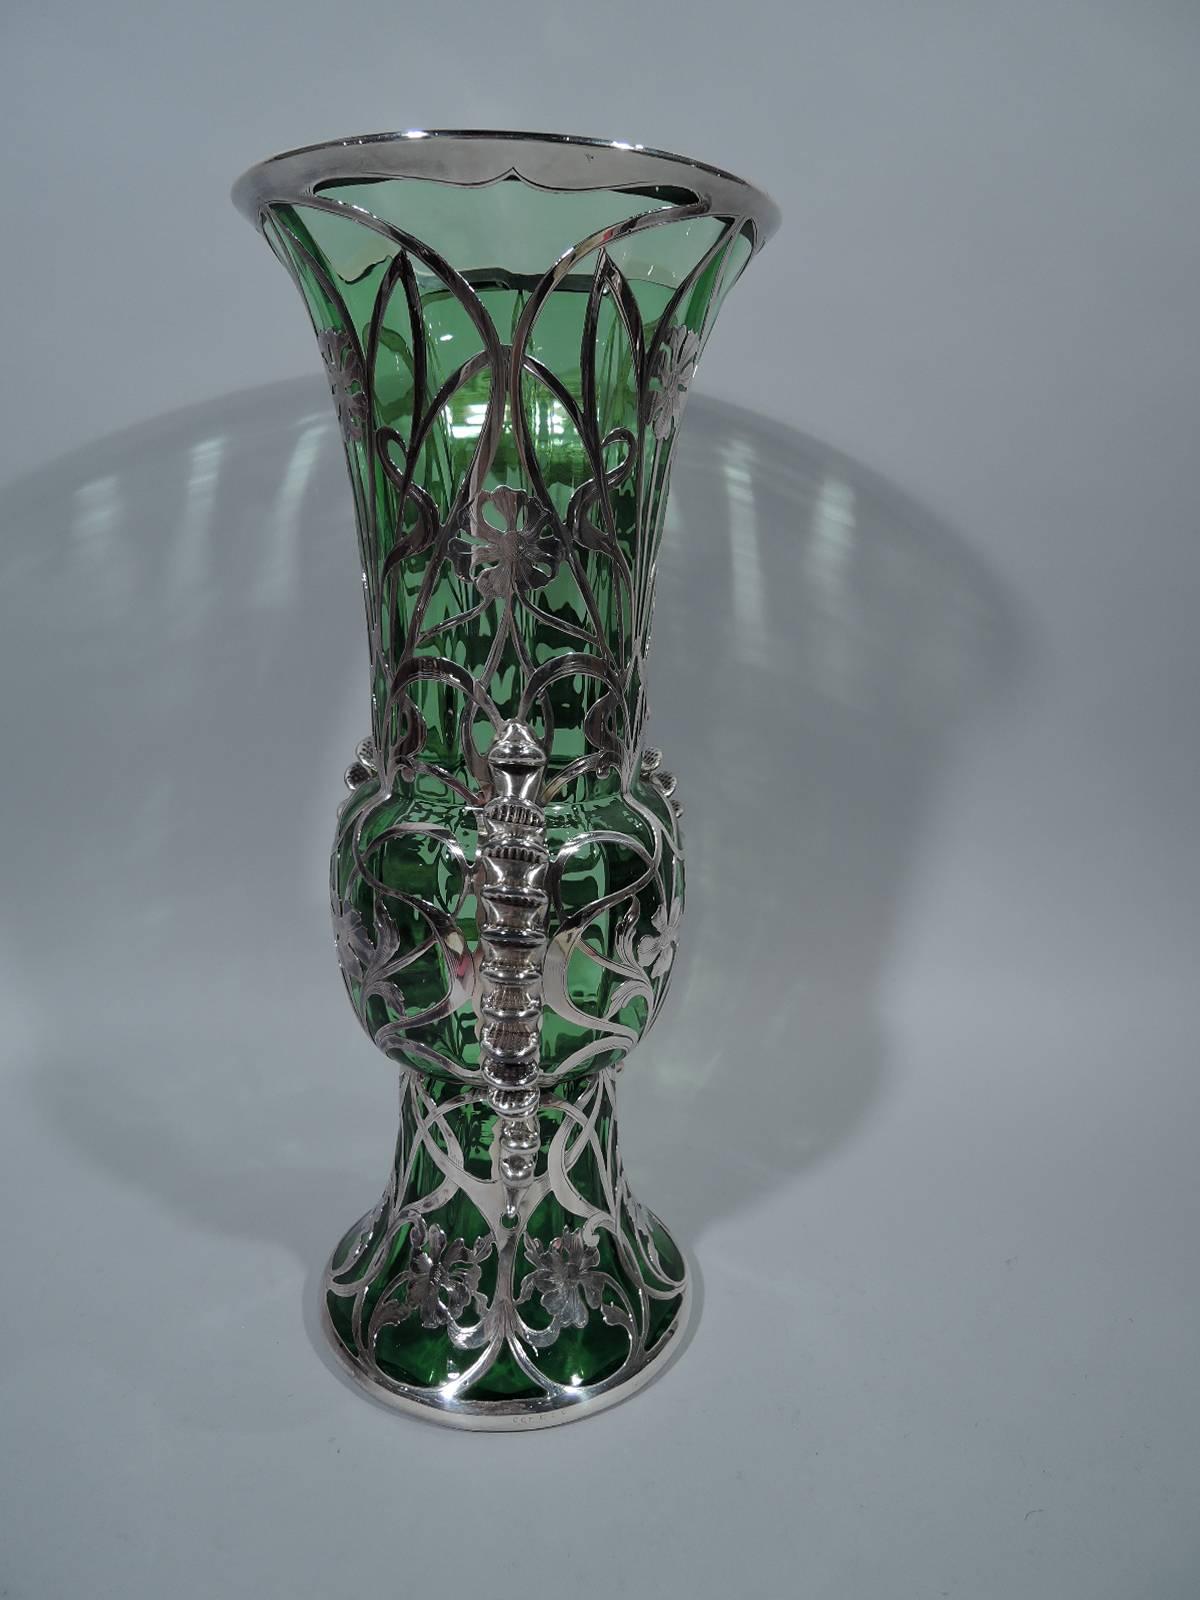 Tall and unusual glass vase with silver overlay. Made by Gorham in Providence, circa 1900. Baluster with wide mouth and raised and spread foot. Entwined and whiplash tendrils with flowers. Surface ornament contrasts with notched brackets applied to